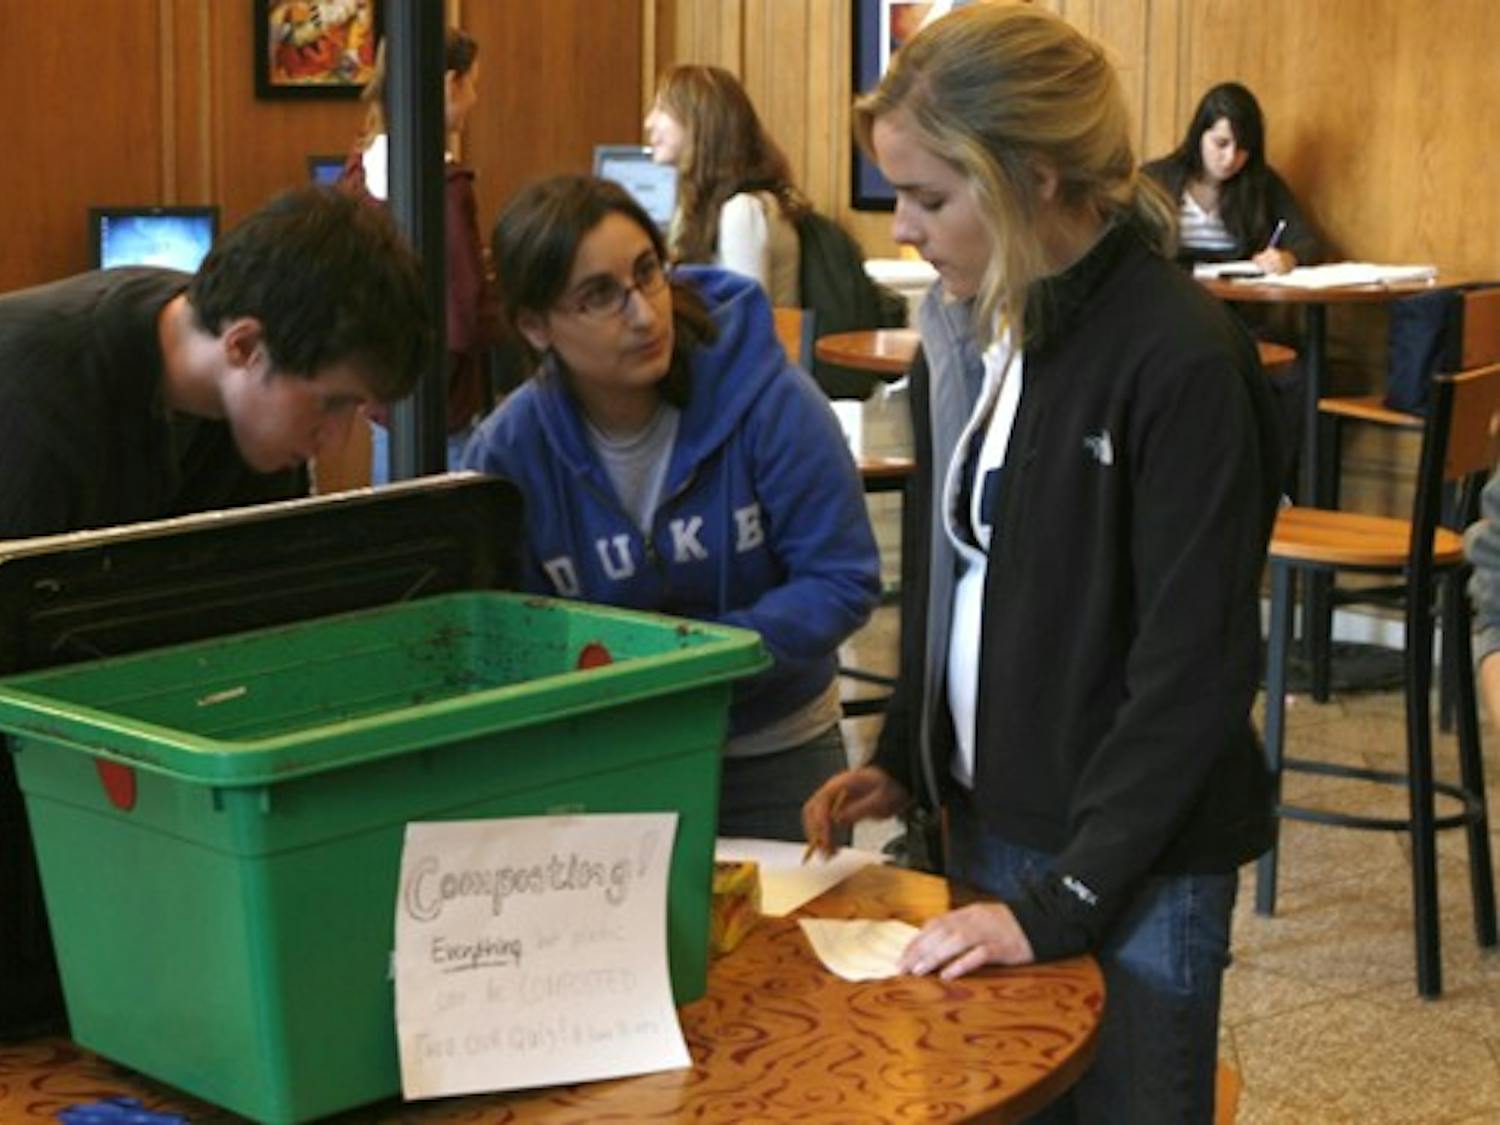 Freshmen partcipating in the annual Eco-Olympics learn how to compost leftover food at the Marketplace Monday afternoon. The competition aims to promote sustainable living among East Campus residents.